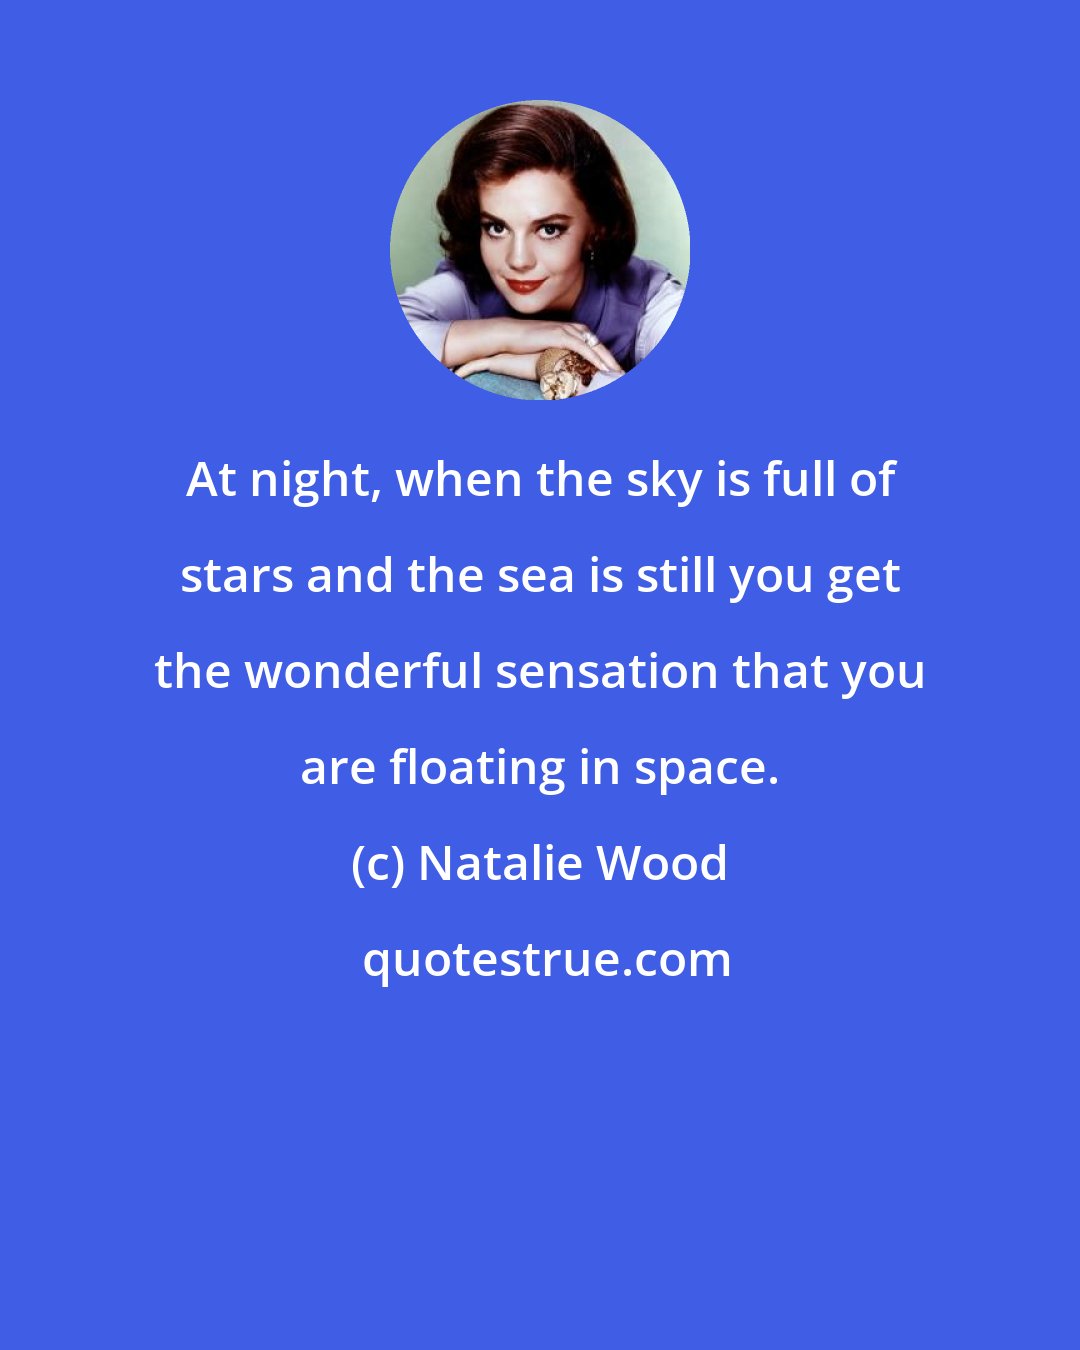 Natalie Wood: At night, when the sky is full of stars and the sea is still you get the wonderful sensation that you are floating in space.